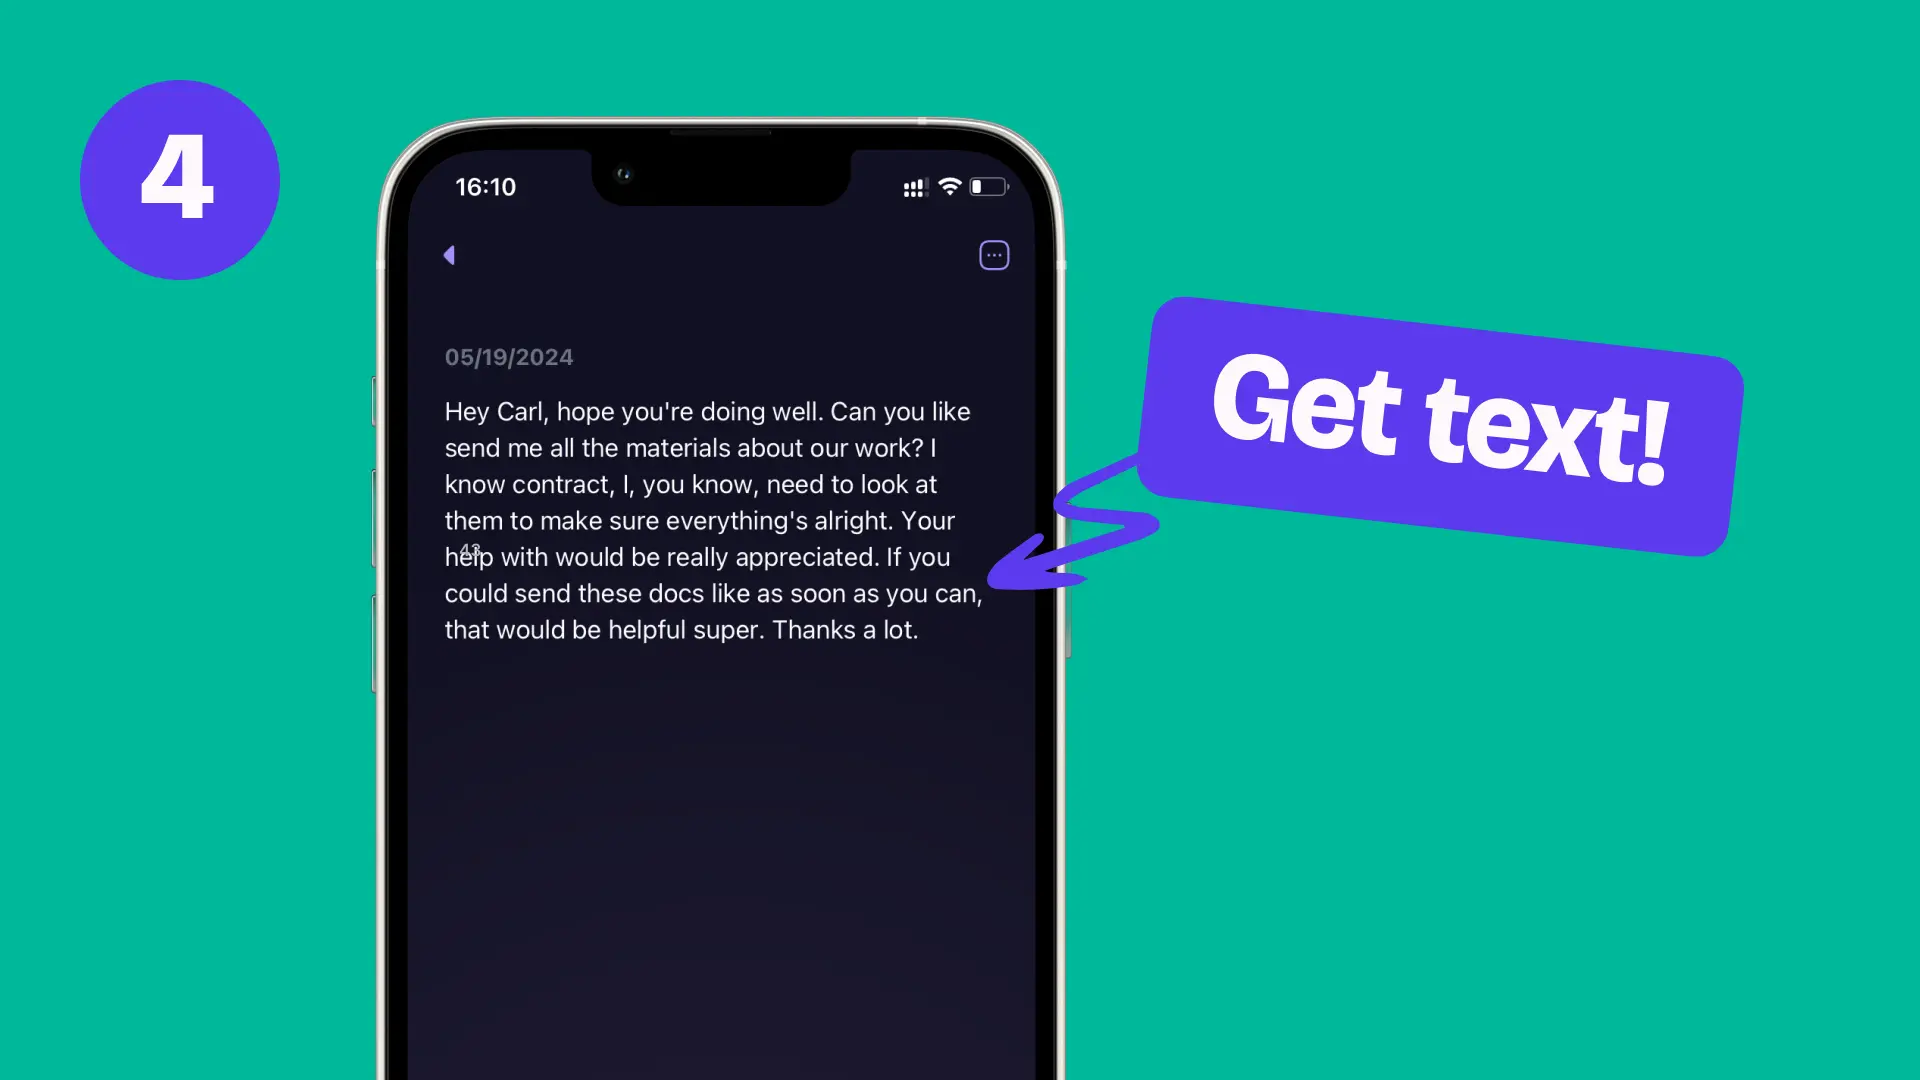 Choose the way to rewrite text. Let's give Magic a try. Letterly.app